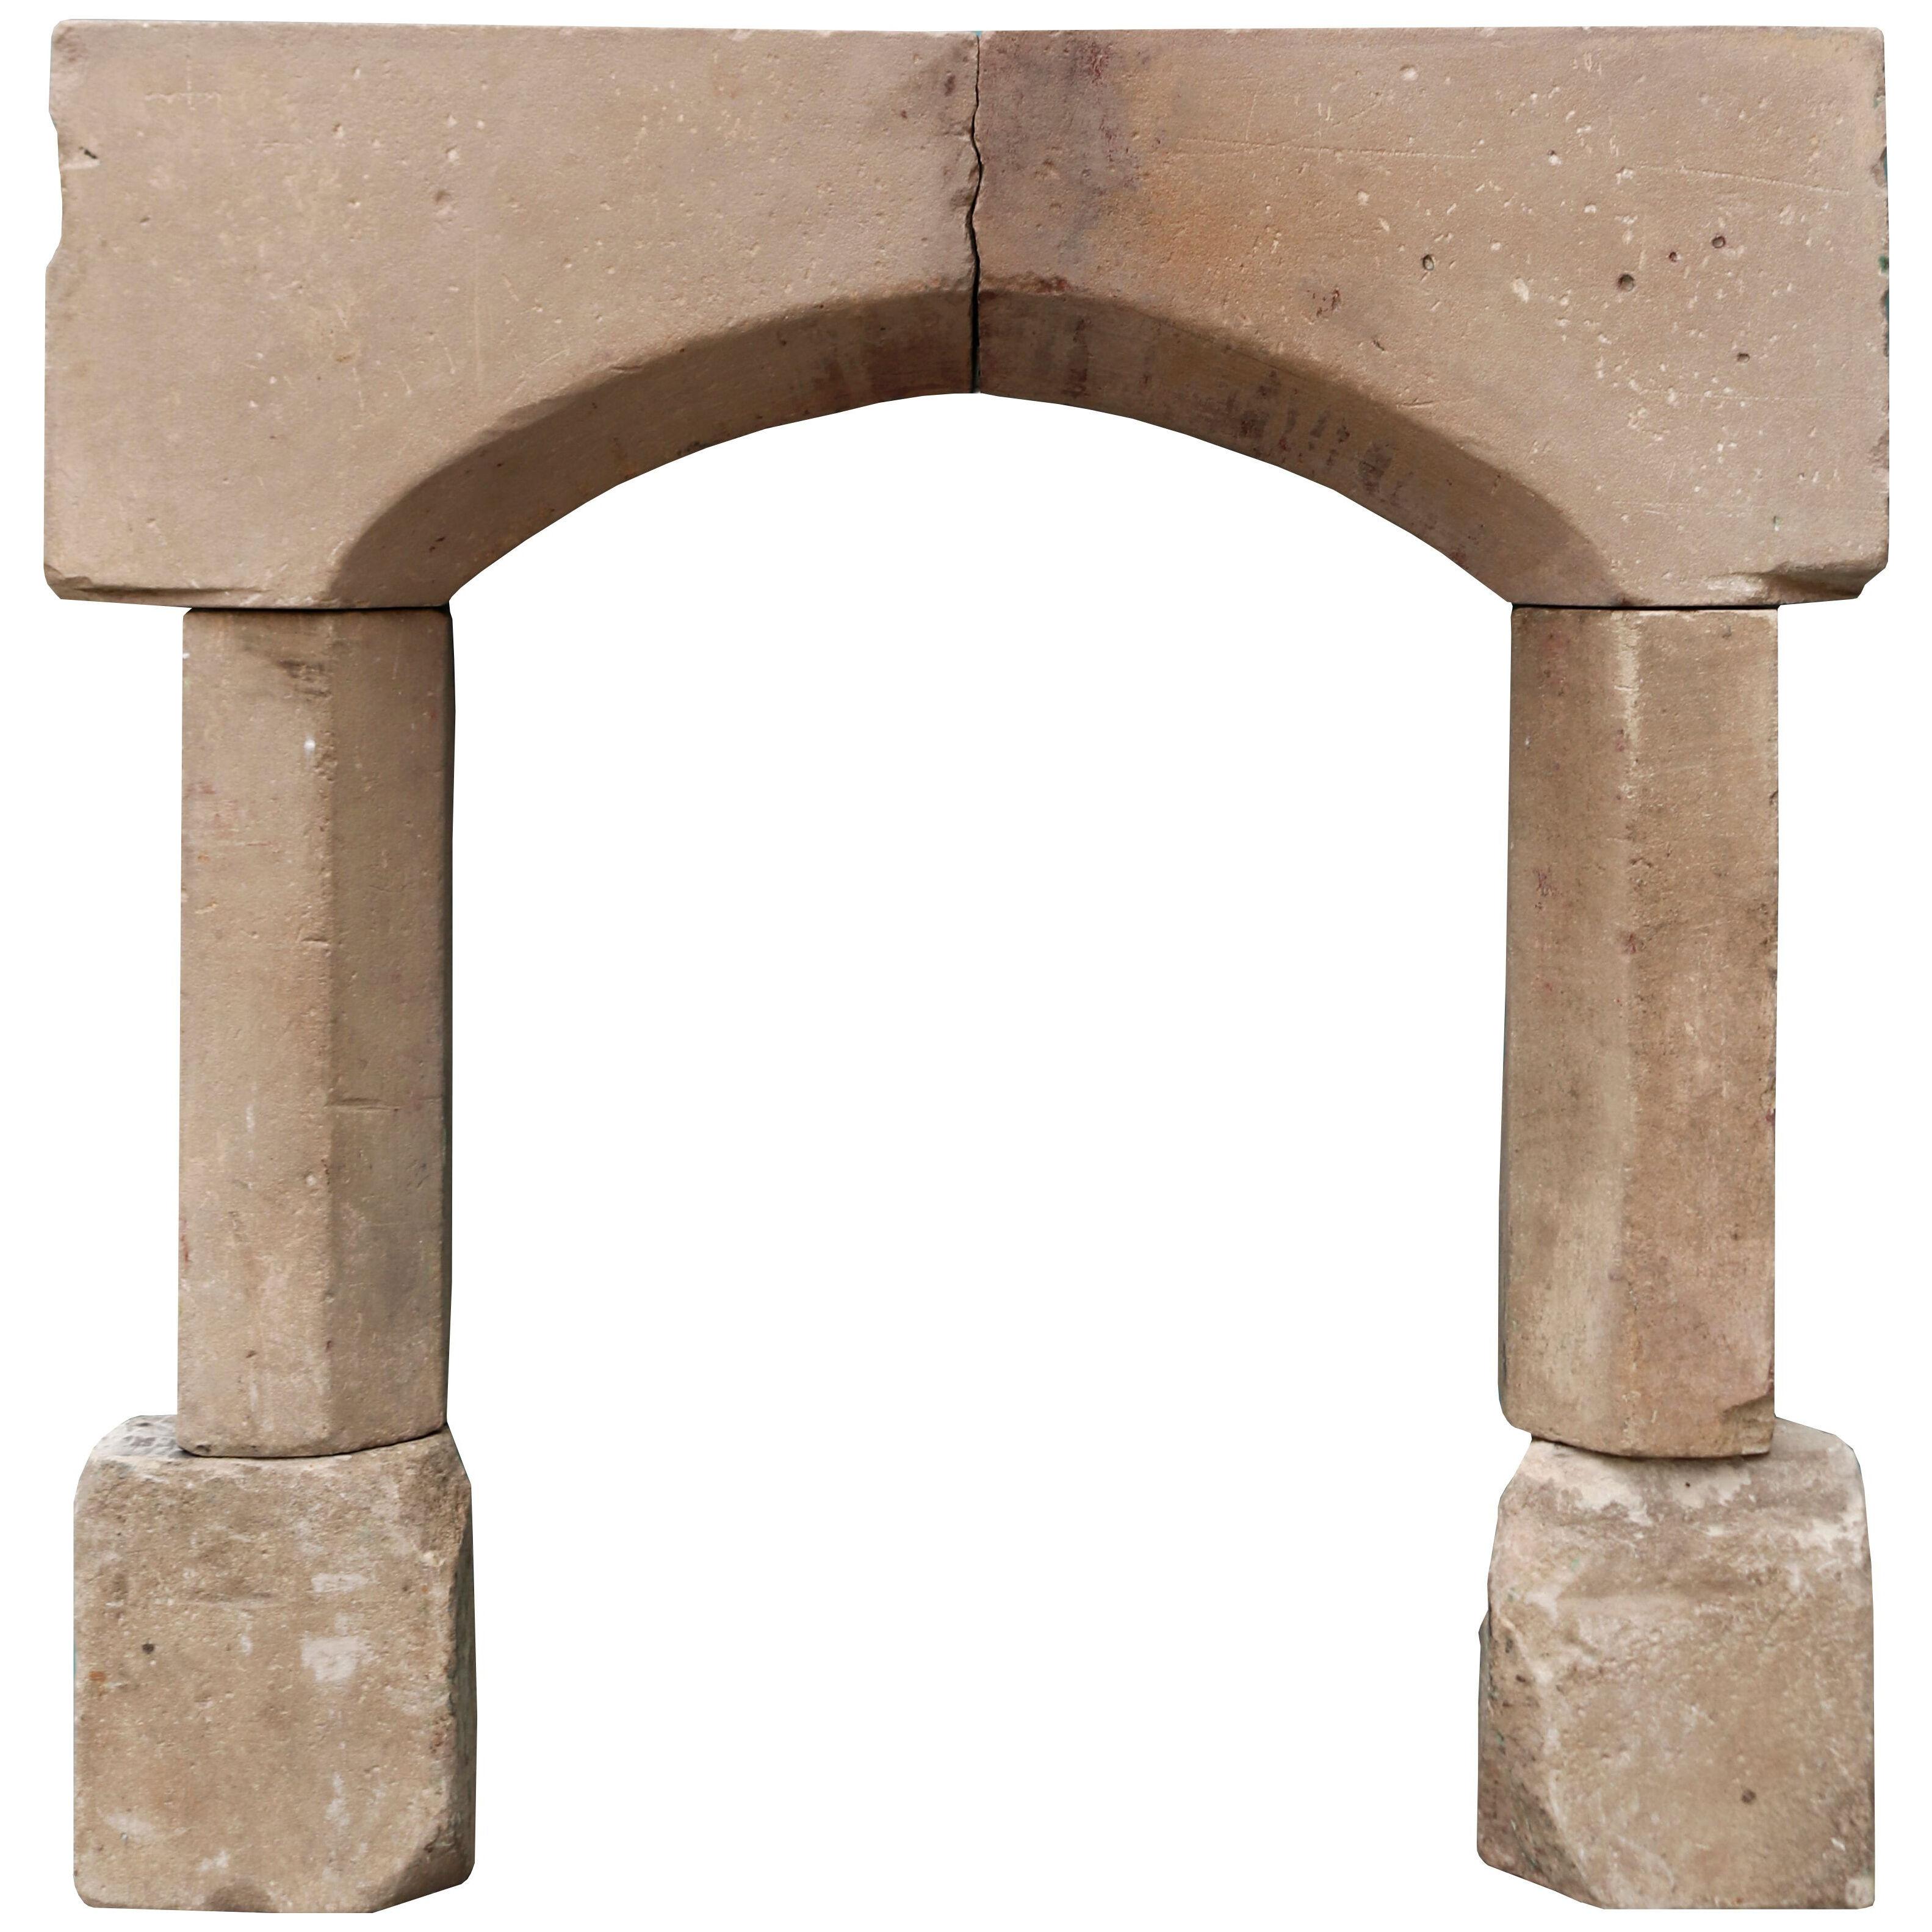 A Reclaimed 18th Century Sandstone Fire Surround